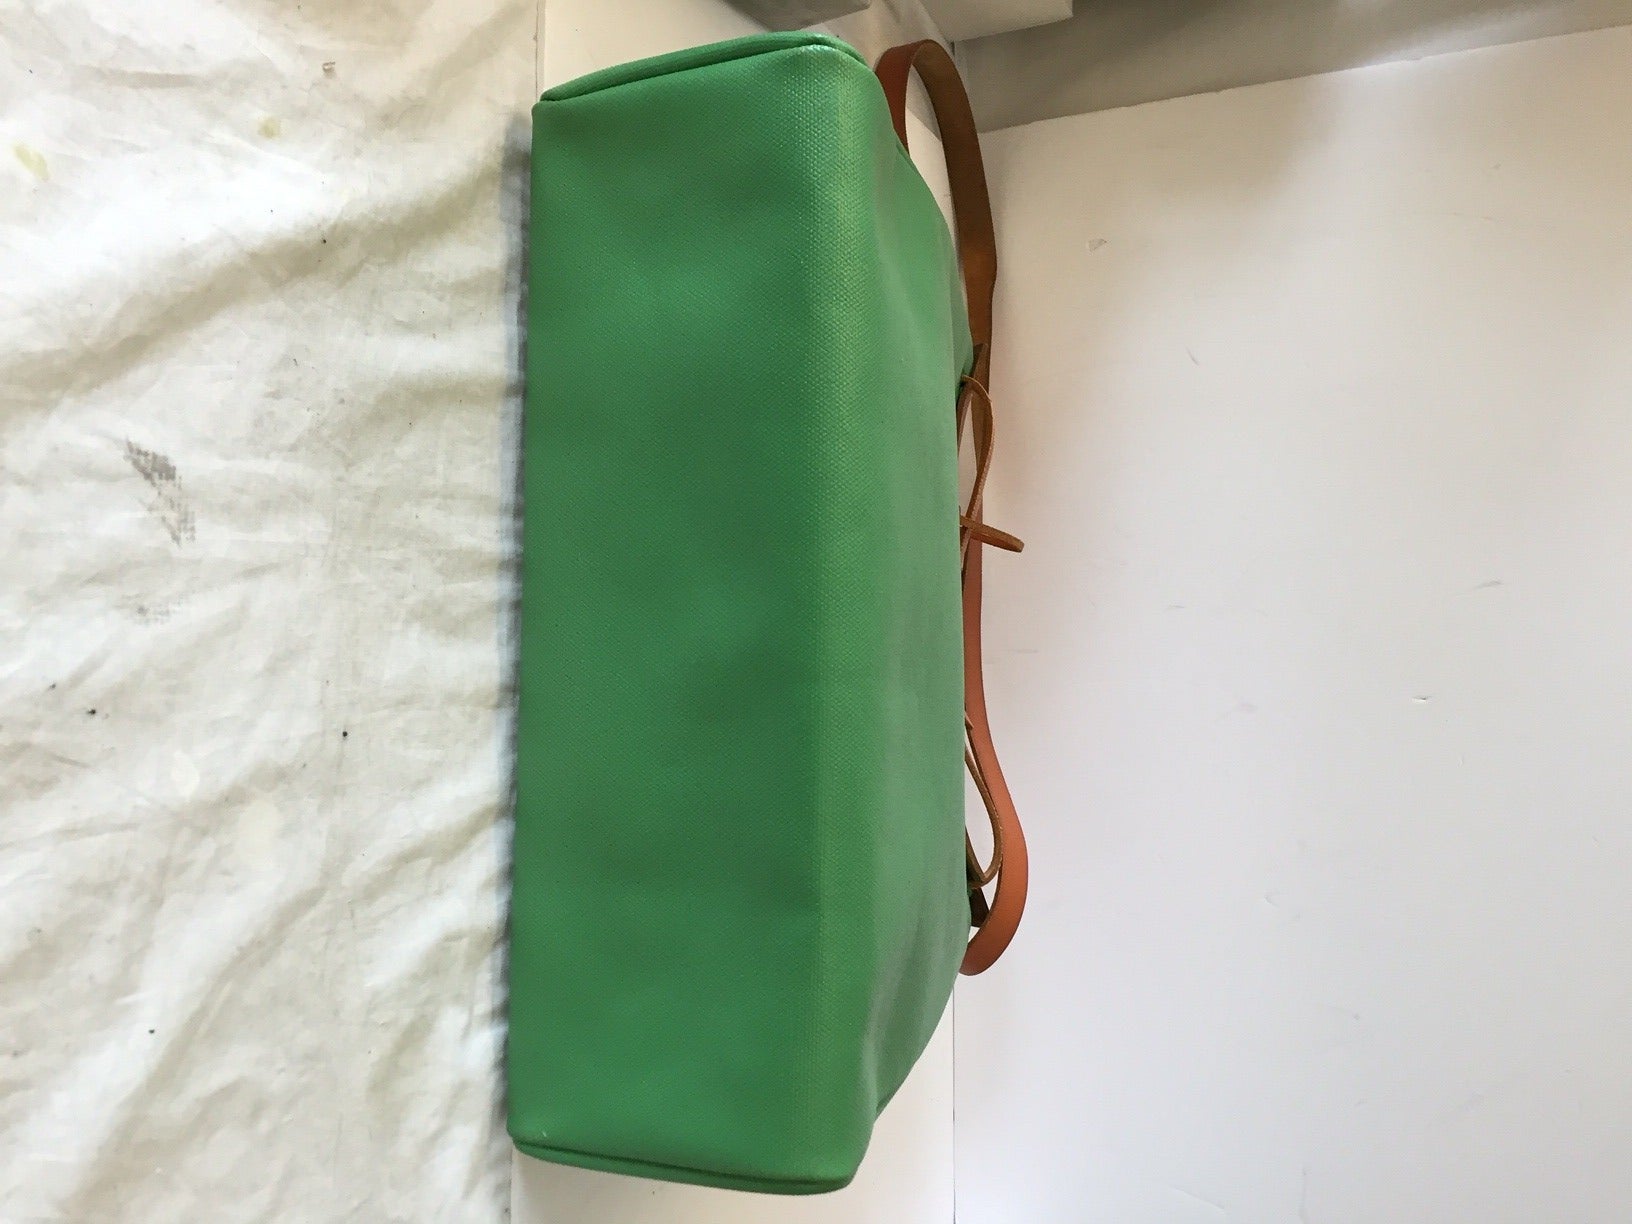 Hermes Herbag 2 in 1 Natural Toile and Bamboo Green Canvas Leather Bag 1999 For Sale 4